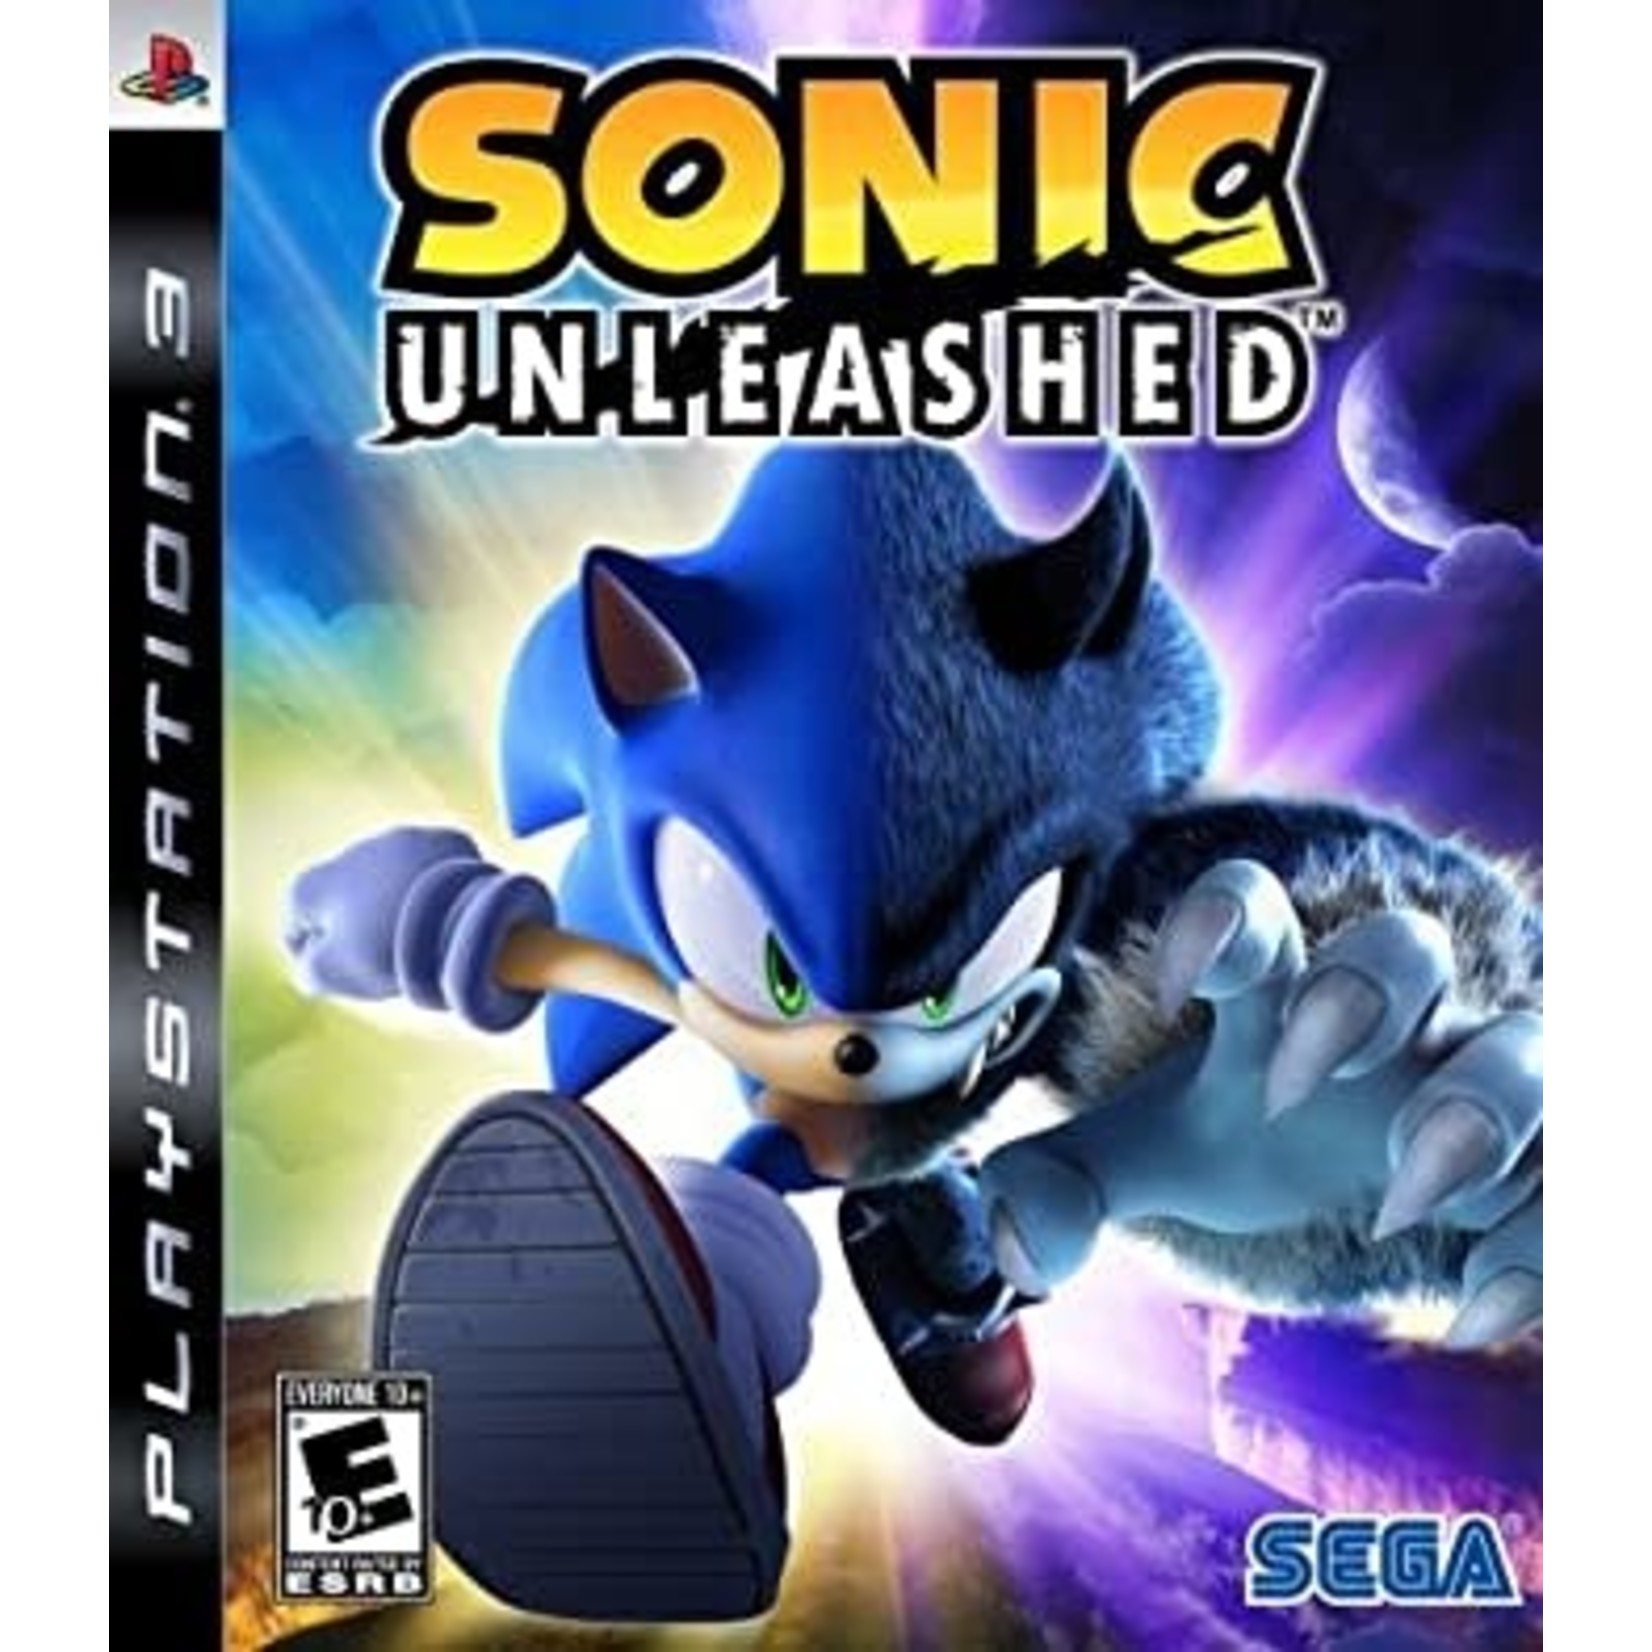 ps3-sonic unleashed